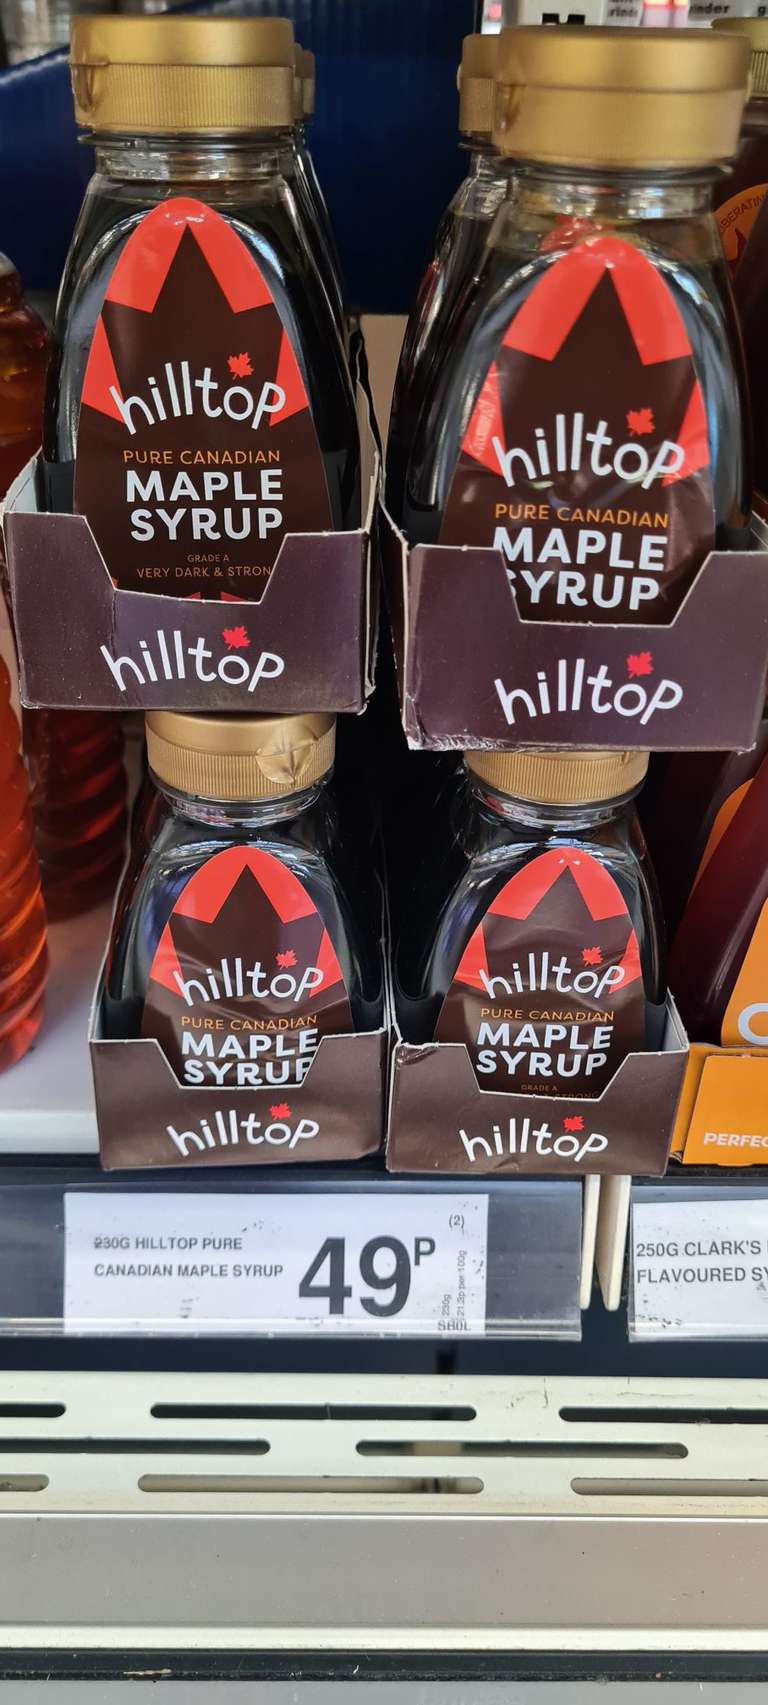 Hilltop Pure Canadian Maple Syrup - Grade A Dark & Strong (Glasgow South Branch)